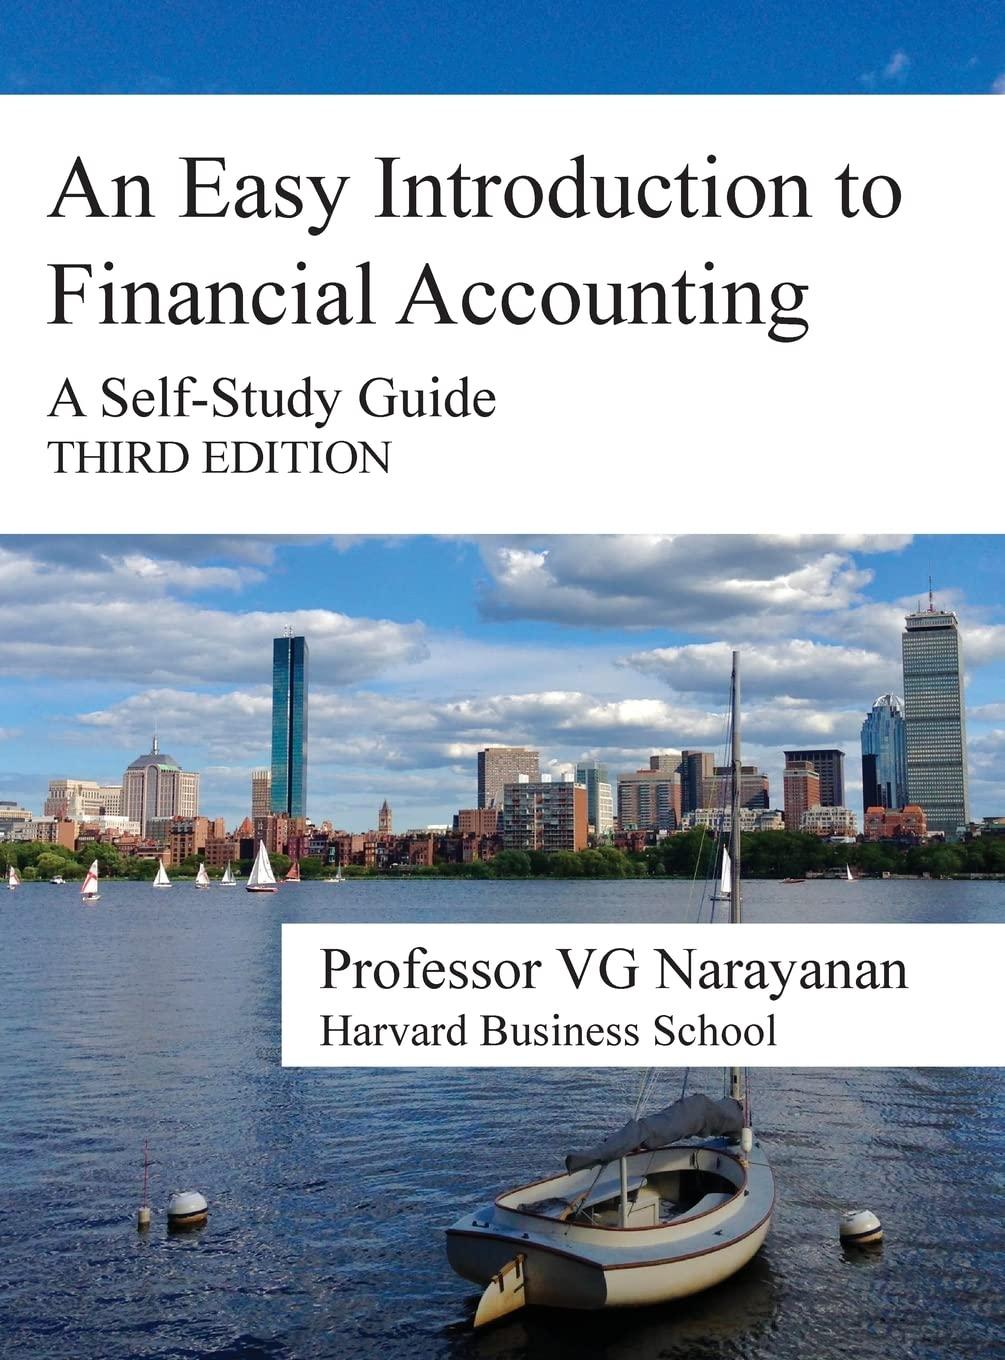 an easy introduction to financial accounting a self study guide 3rd edition v g narayanan 099789363x,